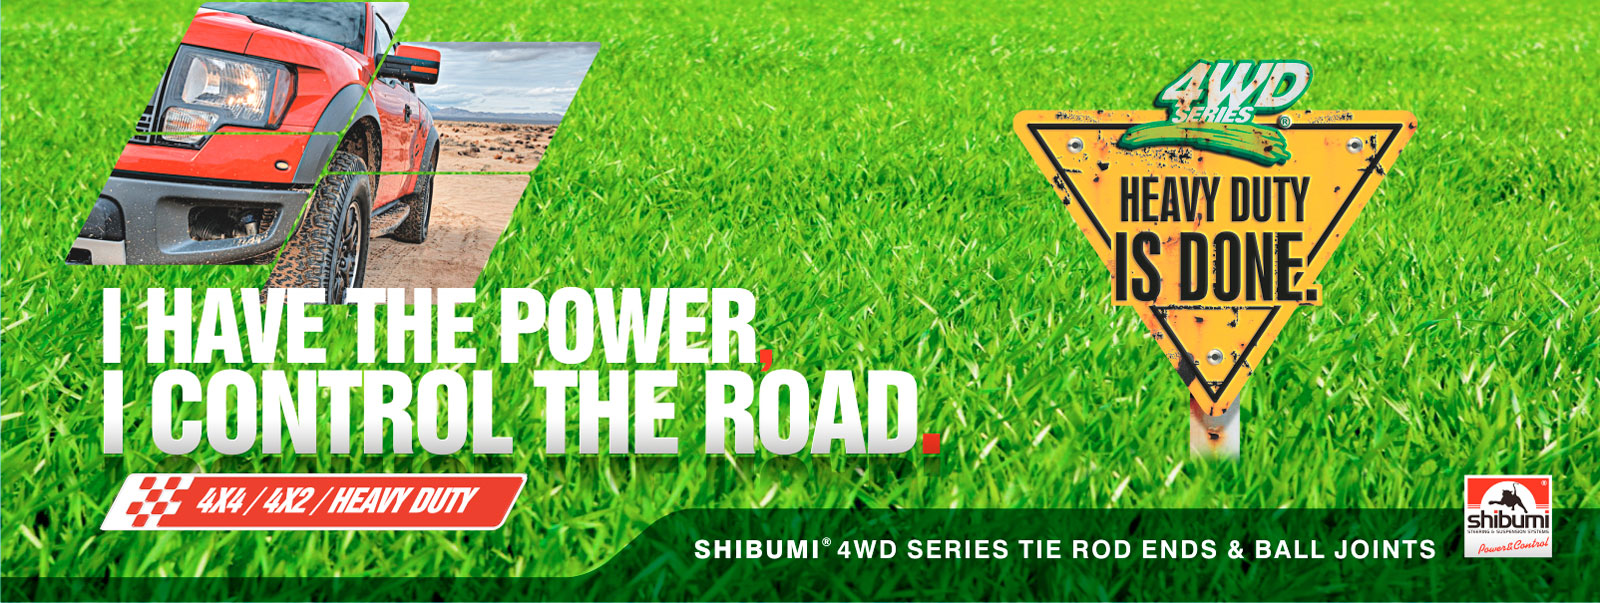 SHIBUMI 4WD SERIES TIE ROD ENDS AND BALL JOINTS